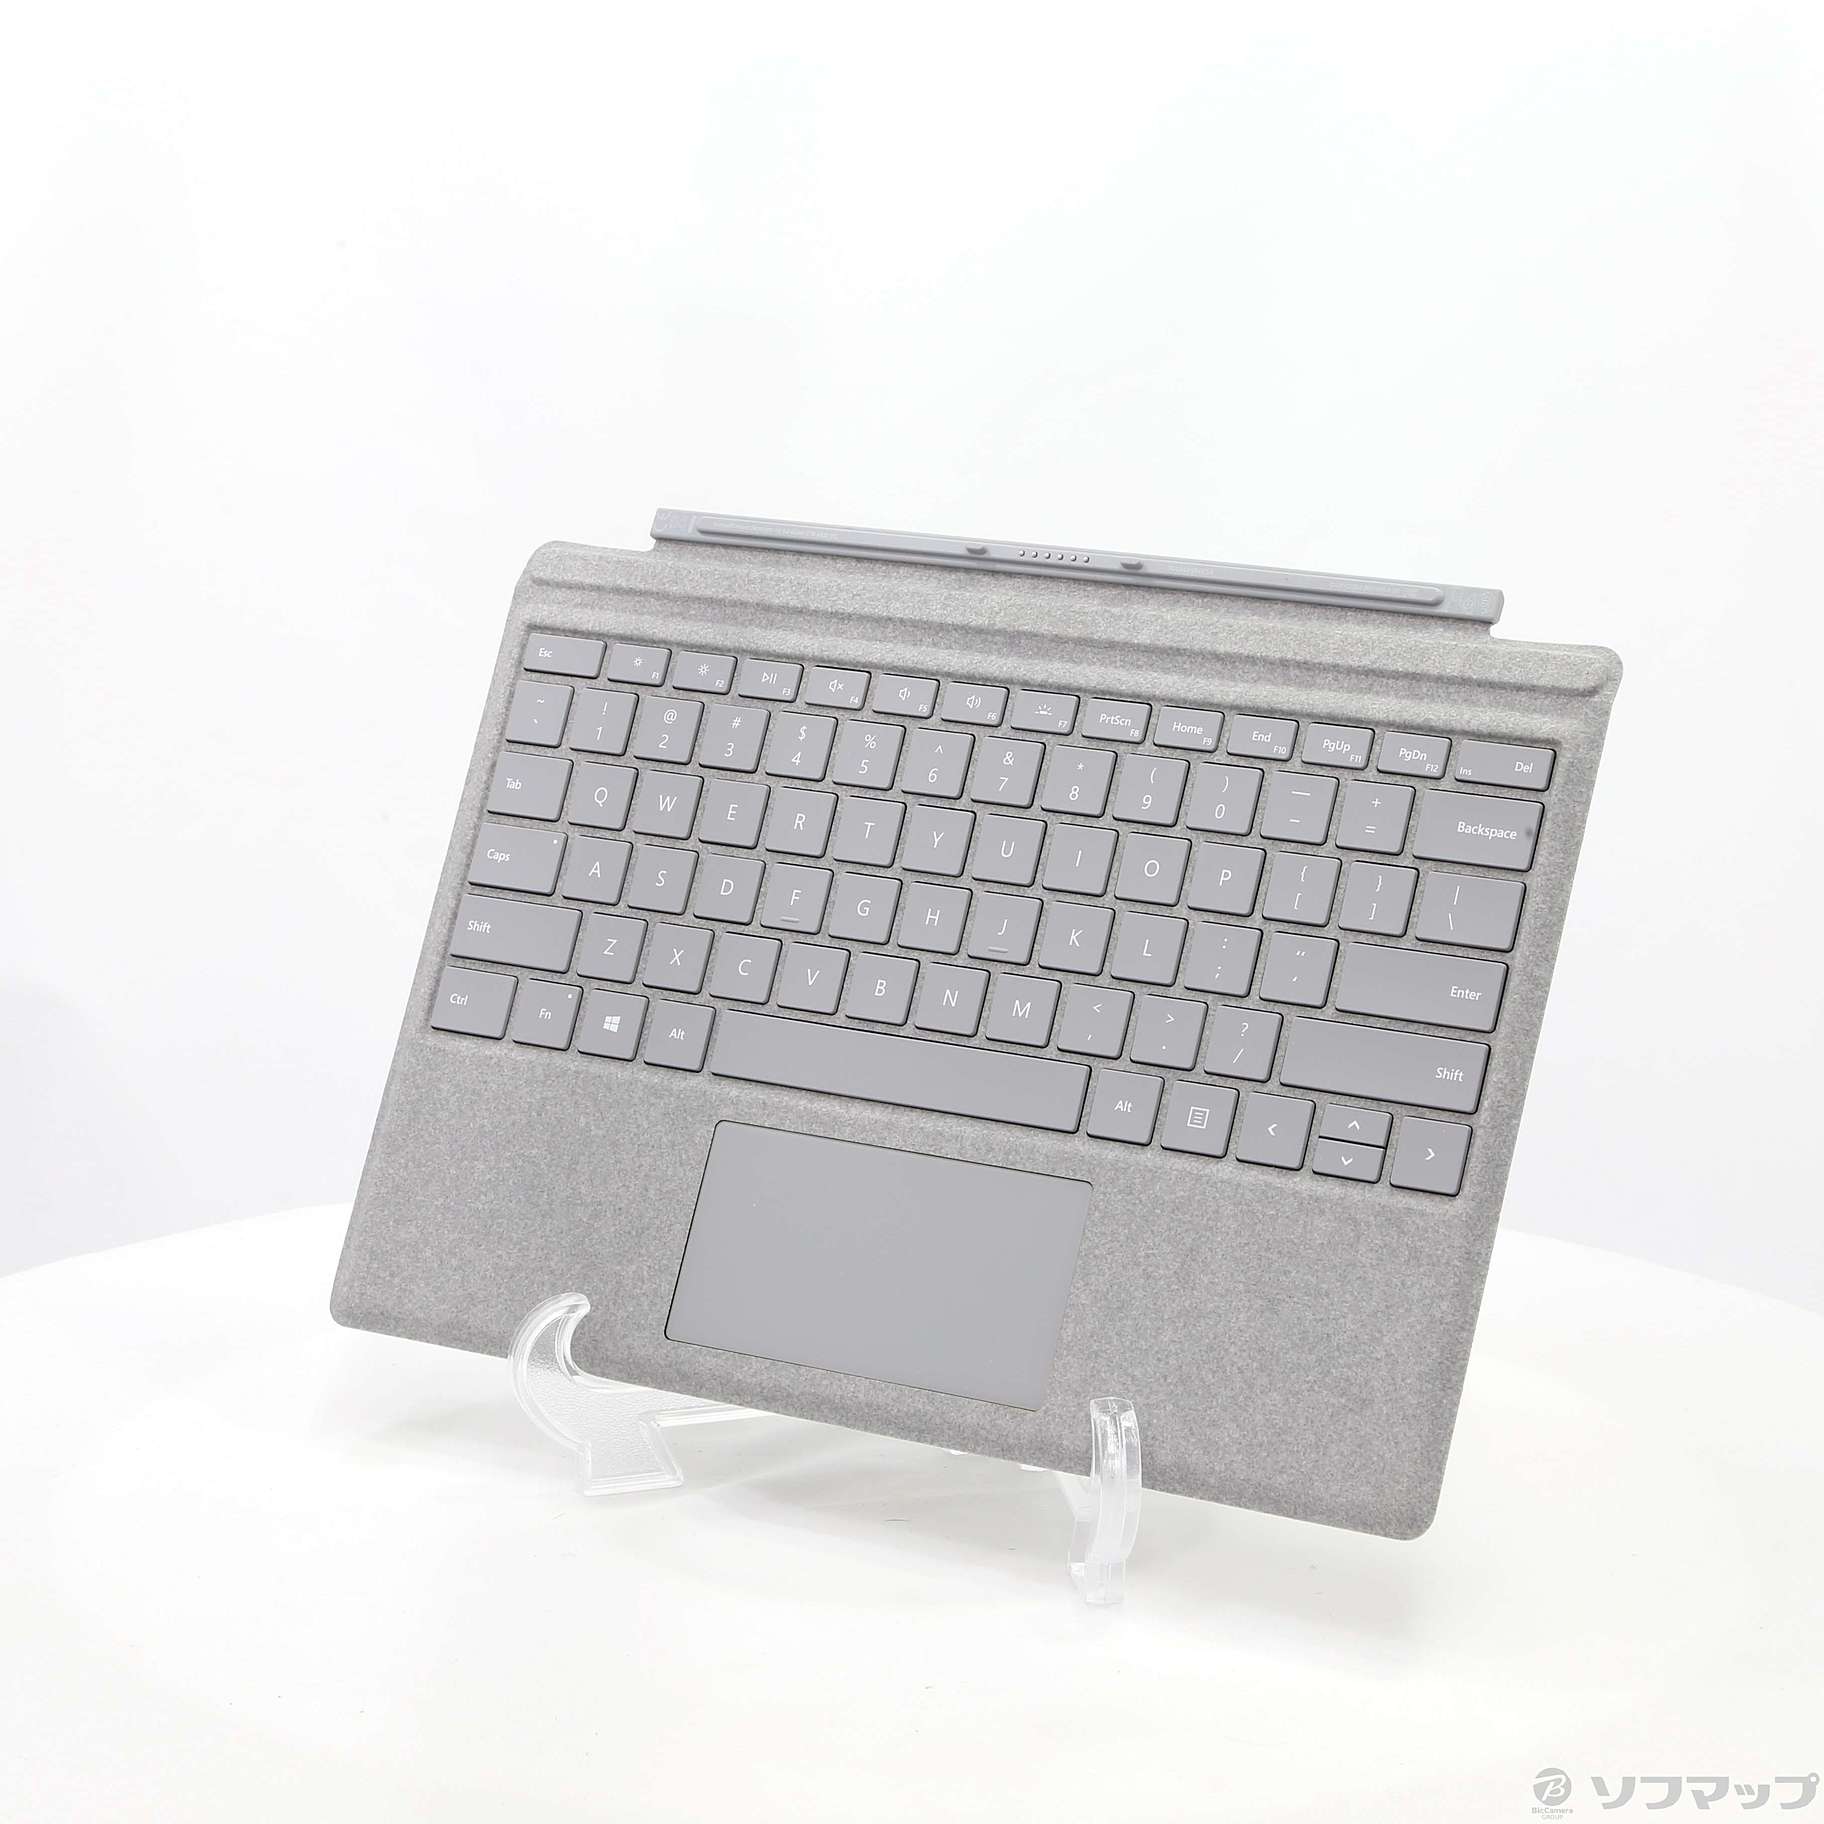 Microsoft surface pro Type cover